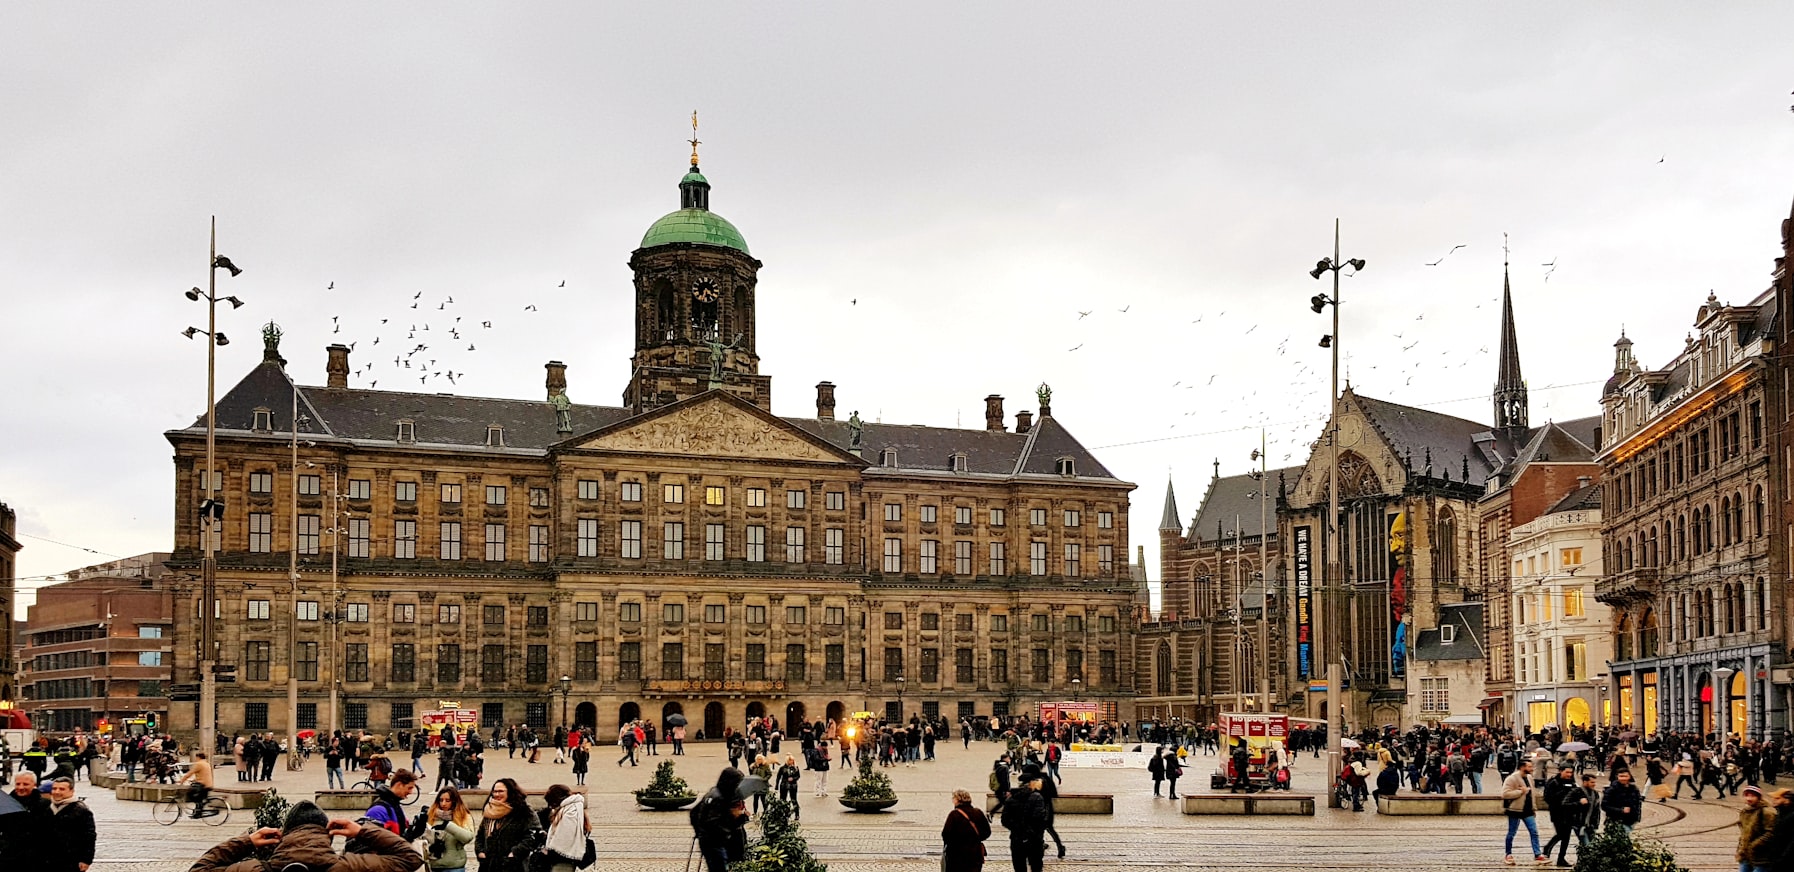 A view of the Royal Palace in Dam Square.